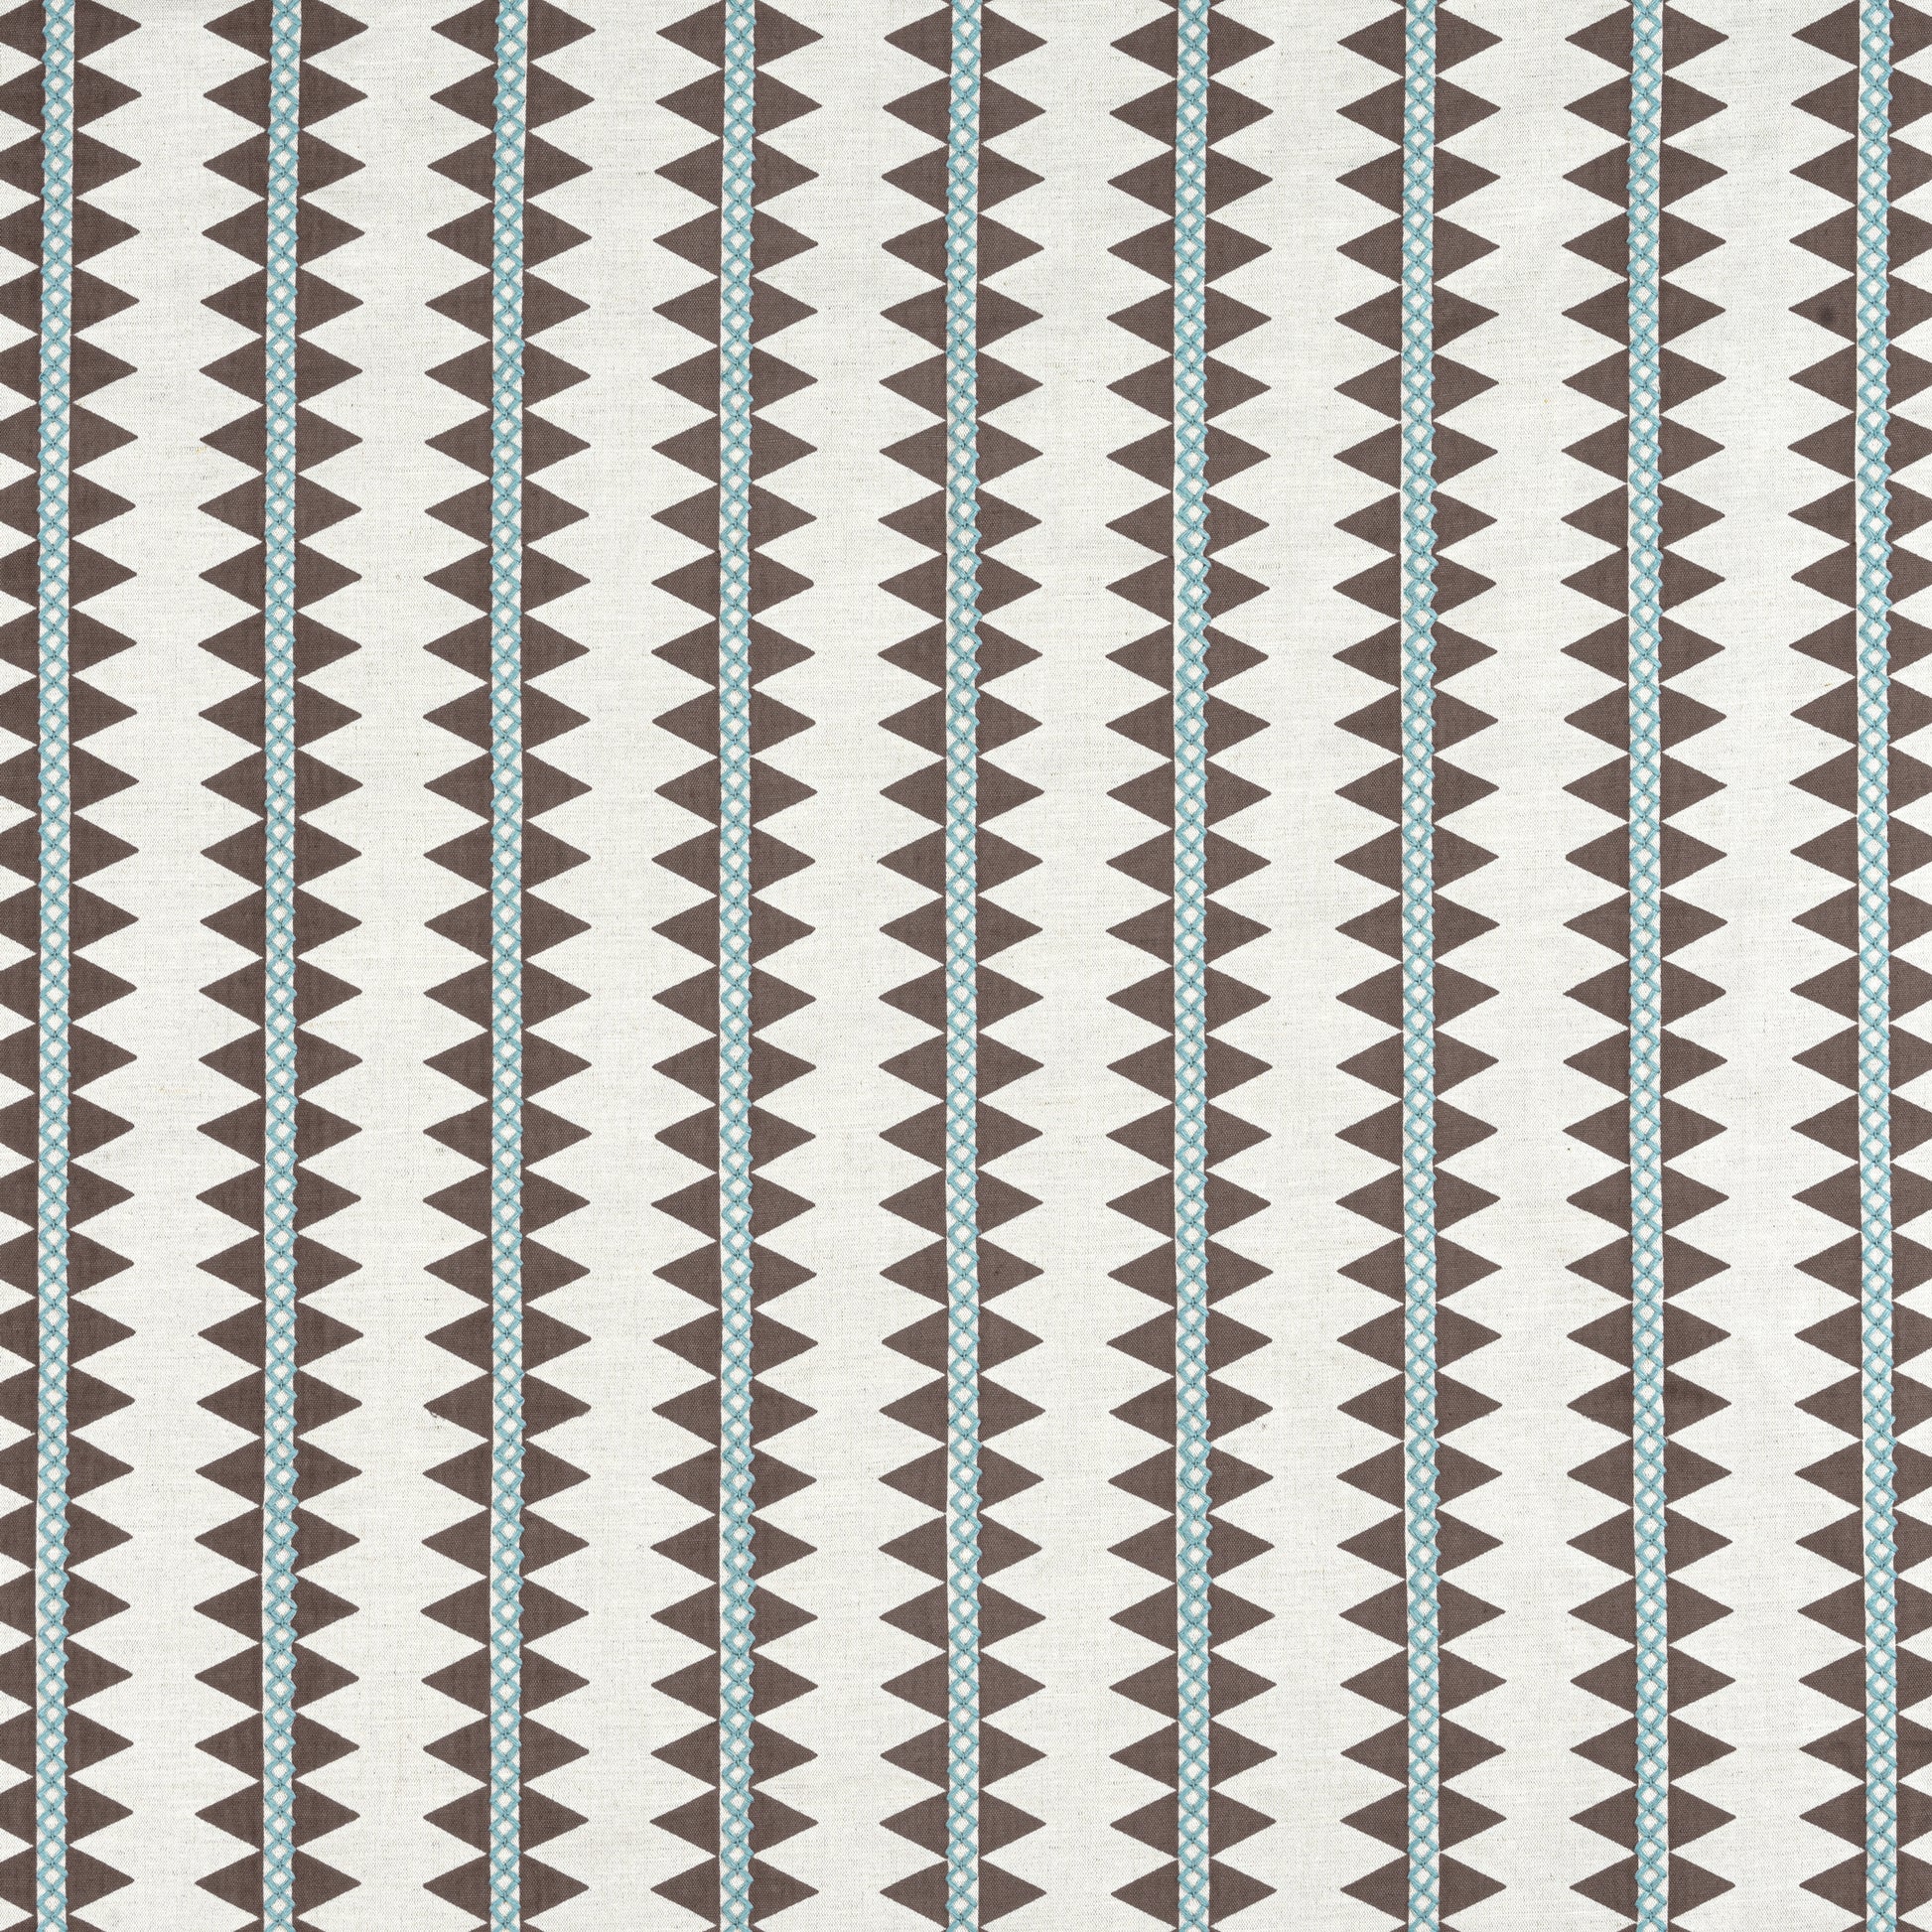 Purchase Thibaut Fabric SKU W713246 pattern name Reno Stripe Embroidery color Brown